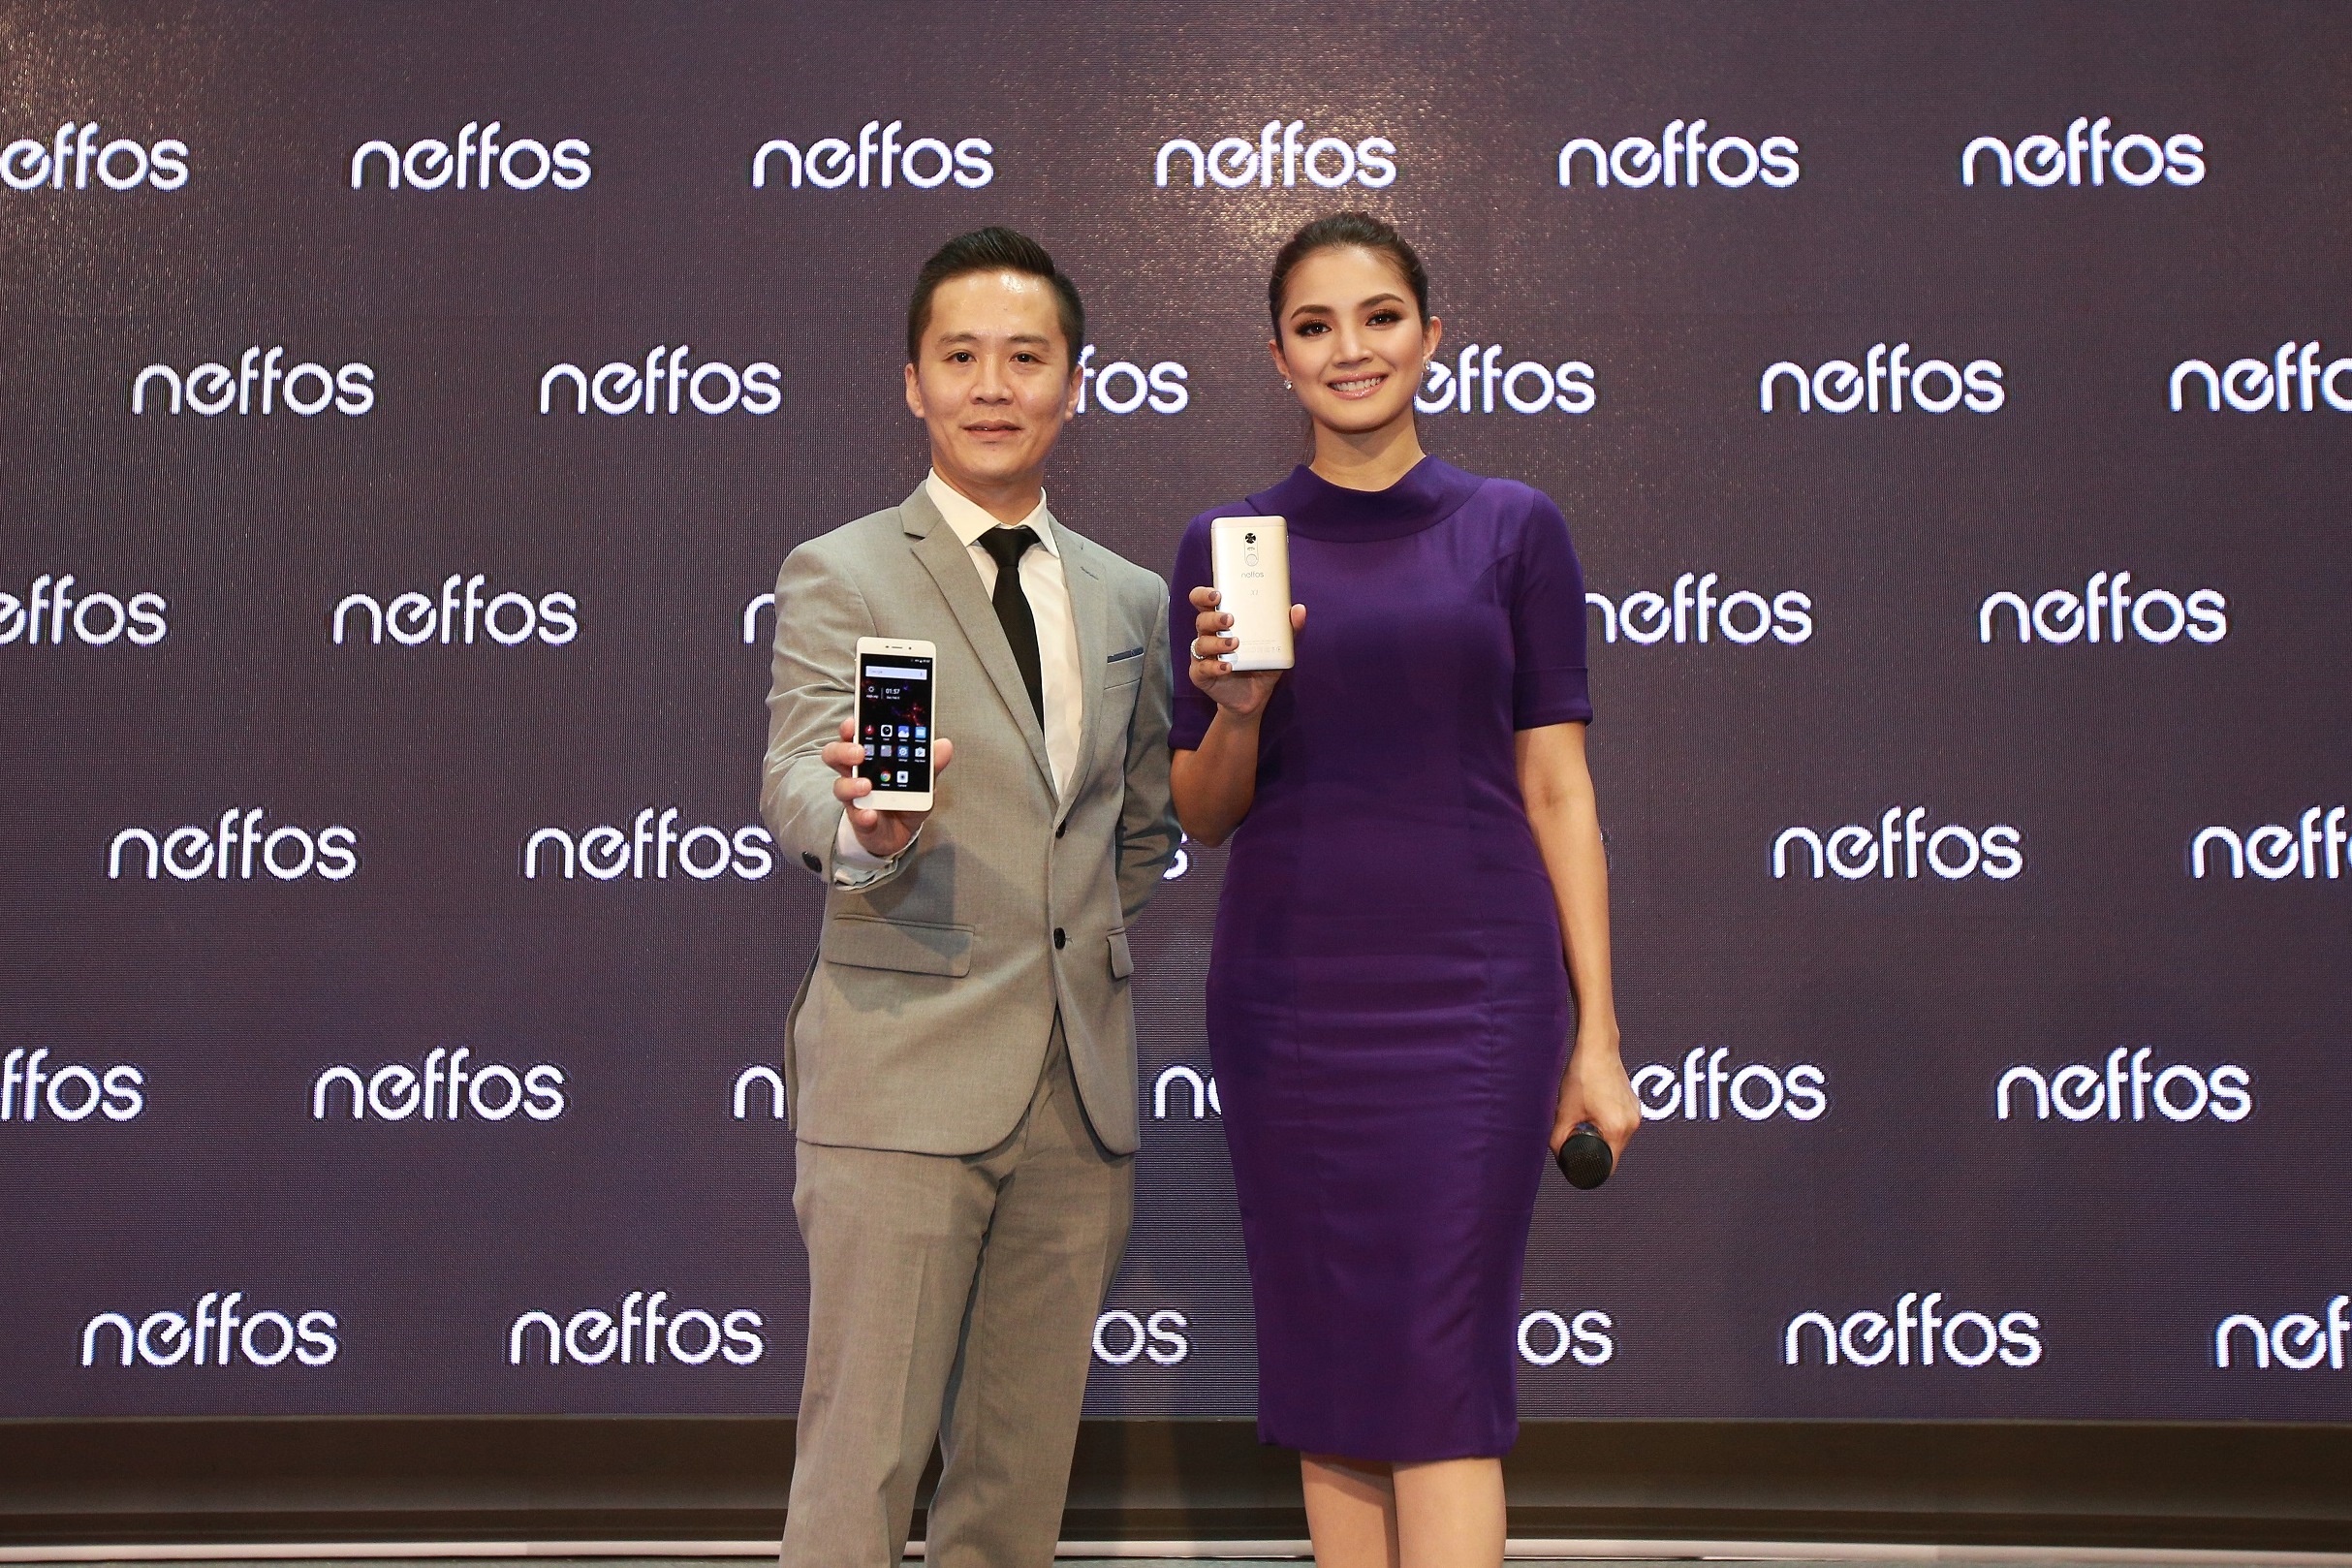 “Live life in the fastlane with Fazura and Neffos”, Kelvin Lim, Senior Marketing Manager of TP-Link Distribution Malaysia Sdn Bhd [Left] and Fazura, Neffos Brand Ambassador together presenting the Neffos X1.